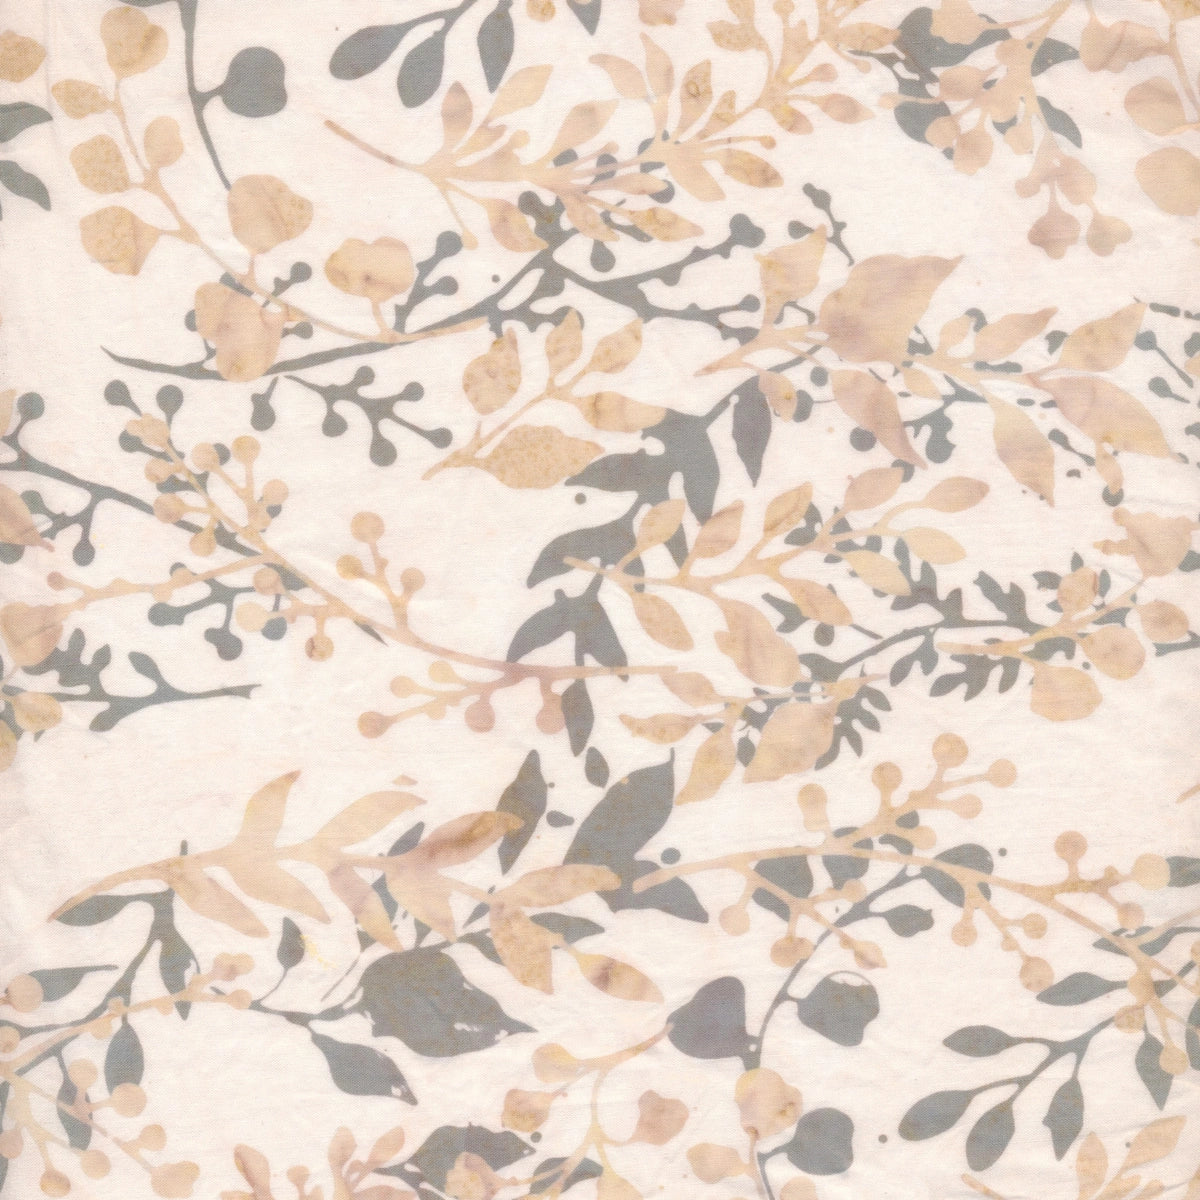 Bali Batiks Coast to Coast by Hoffman Fabrics is another beautiful batik line featuring blue, gray, and cream fabrics with a variety of floral designs. Decorate your next spring project with this light cream fabric with blue and cream leaves and vines all over. This would make a great blender for quilting! Perfect for quilting, clothing and crafting. 